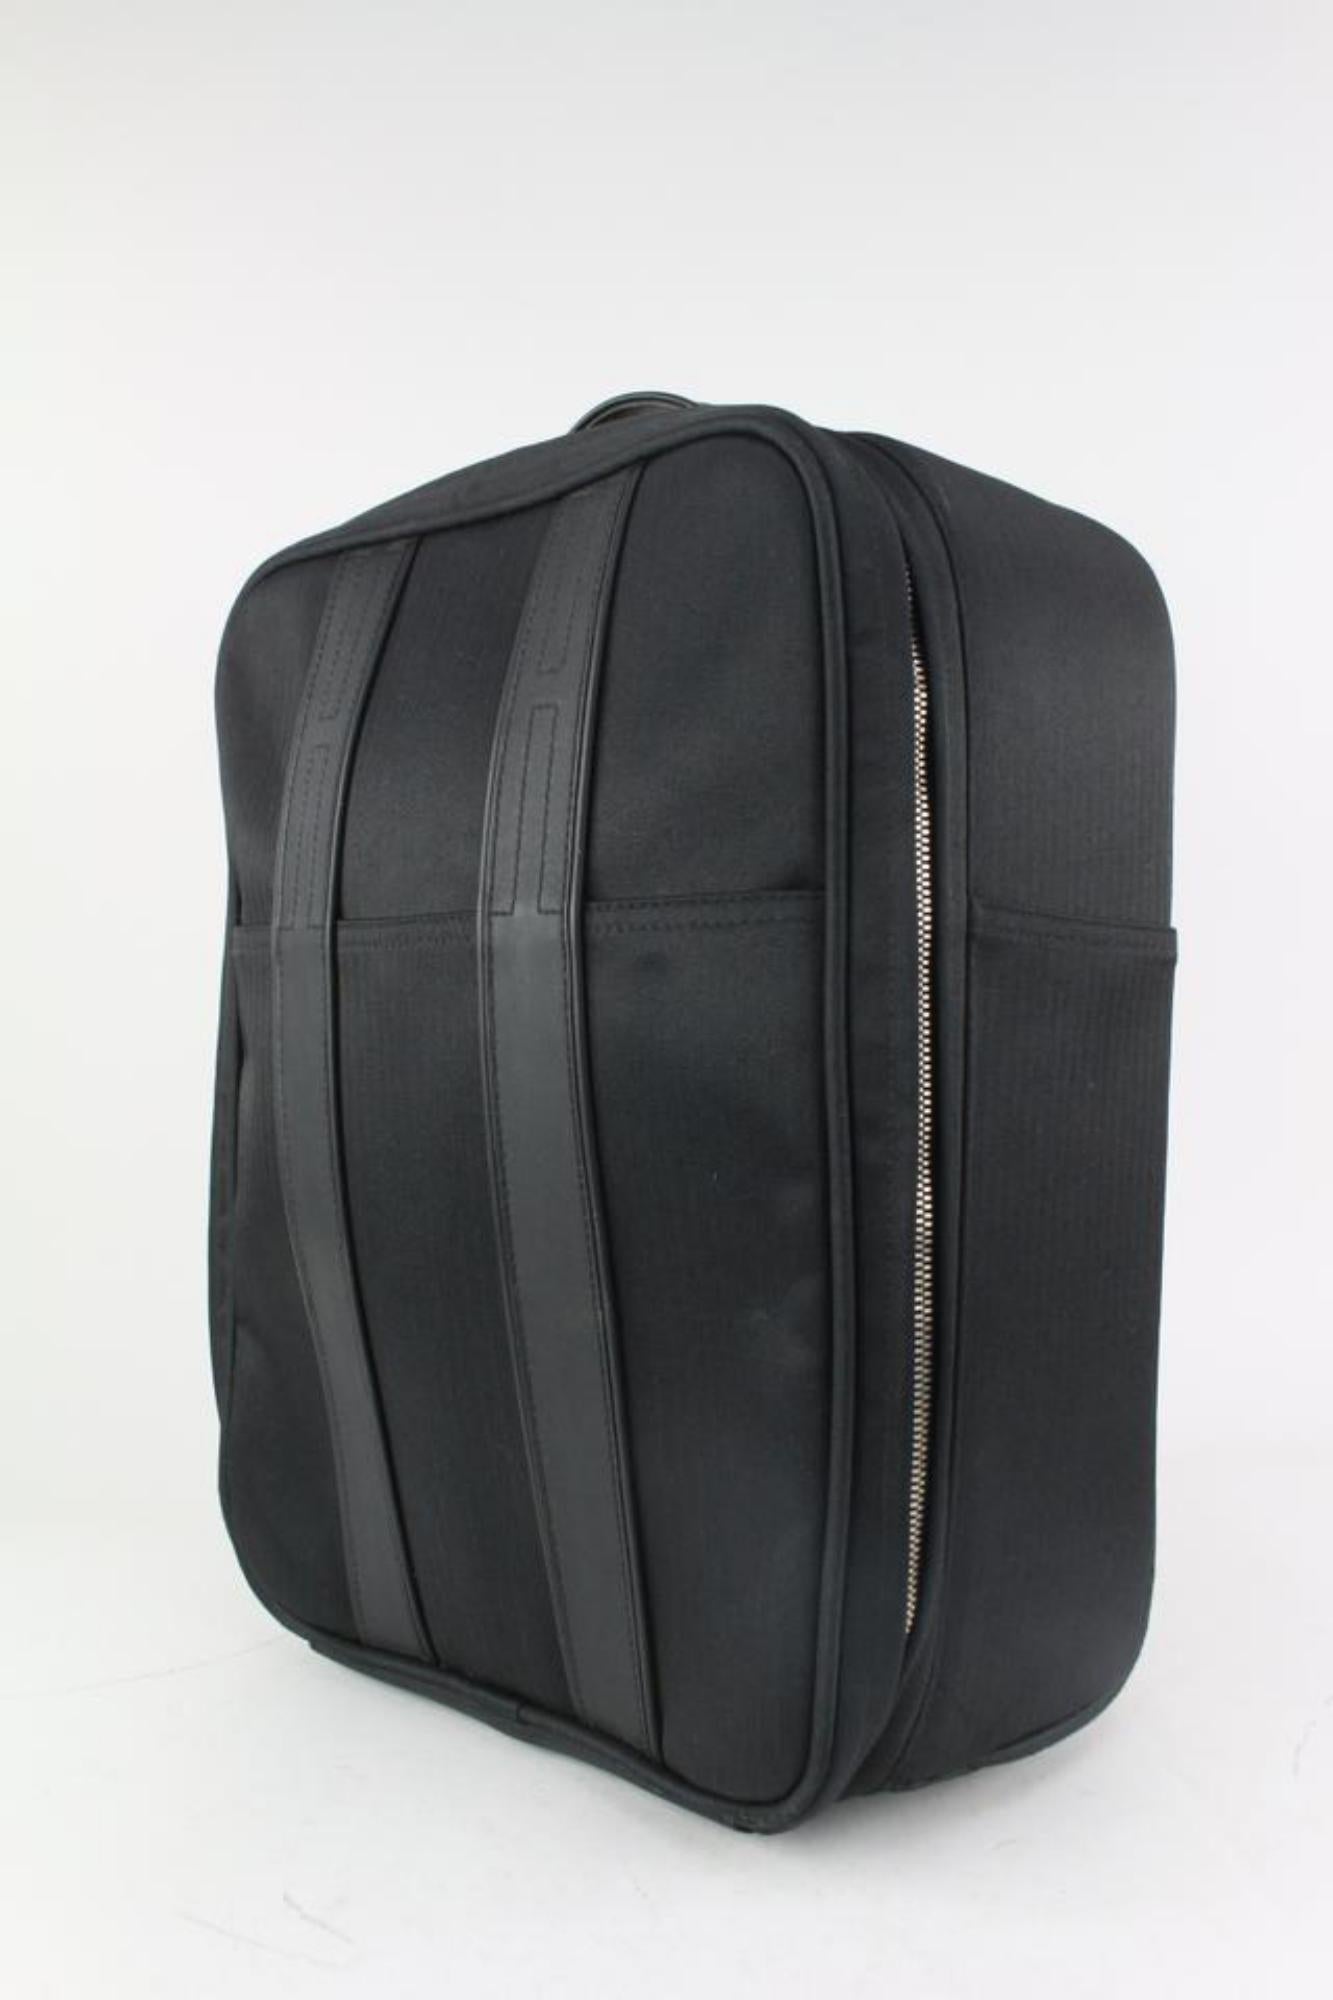 Hermès Black Canvas x Leather Herline Rolling Luggage Trolley Suitcase 1122h2 For Sale 5